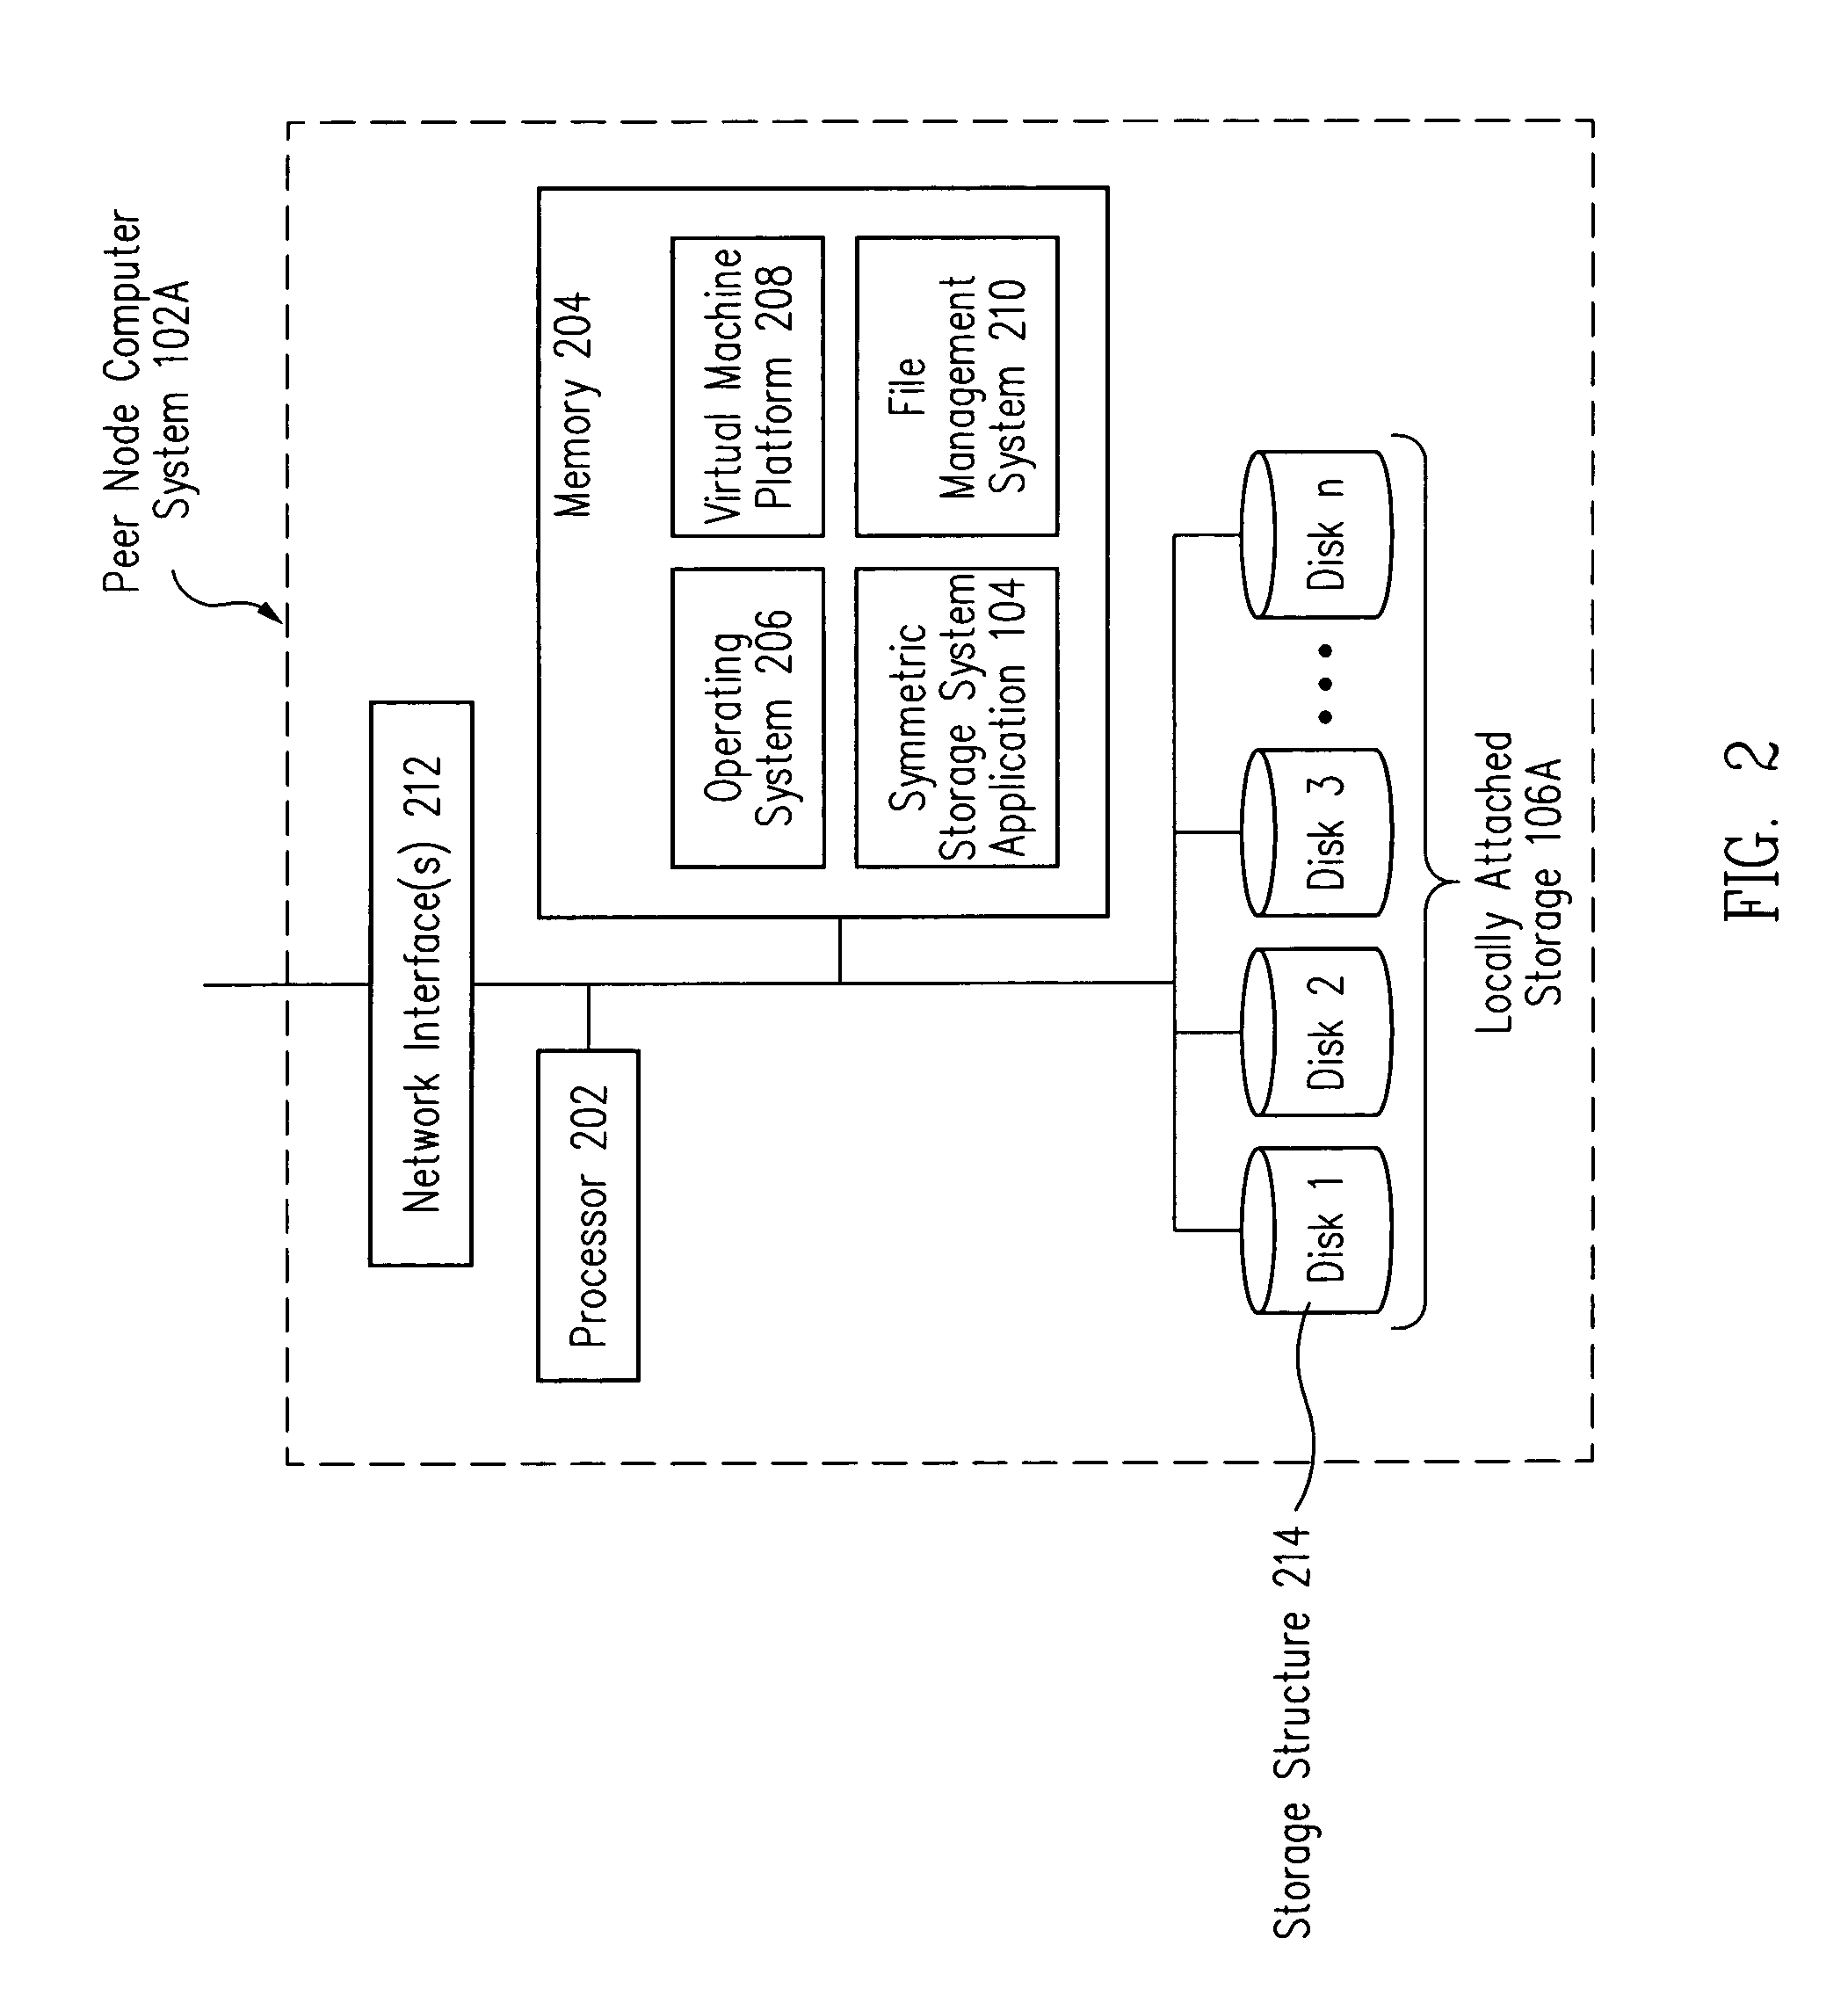 Distributed data storage system for fixed content